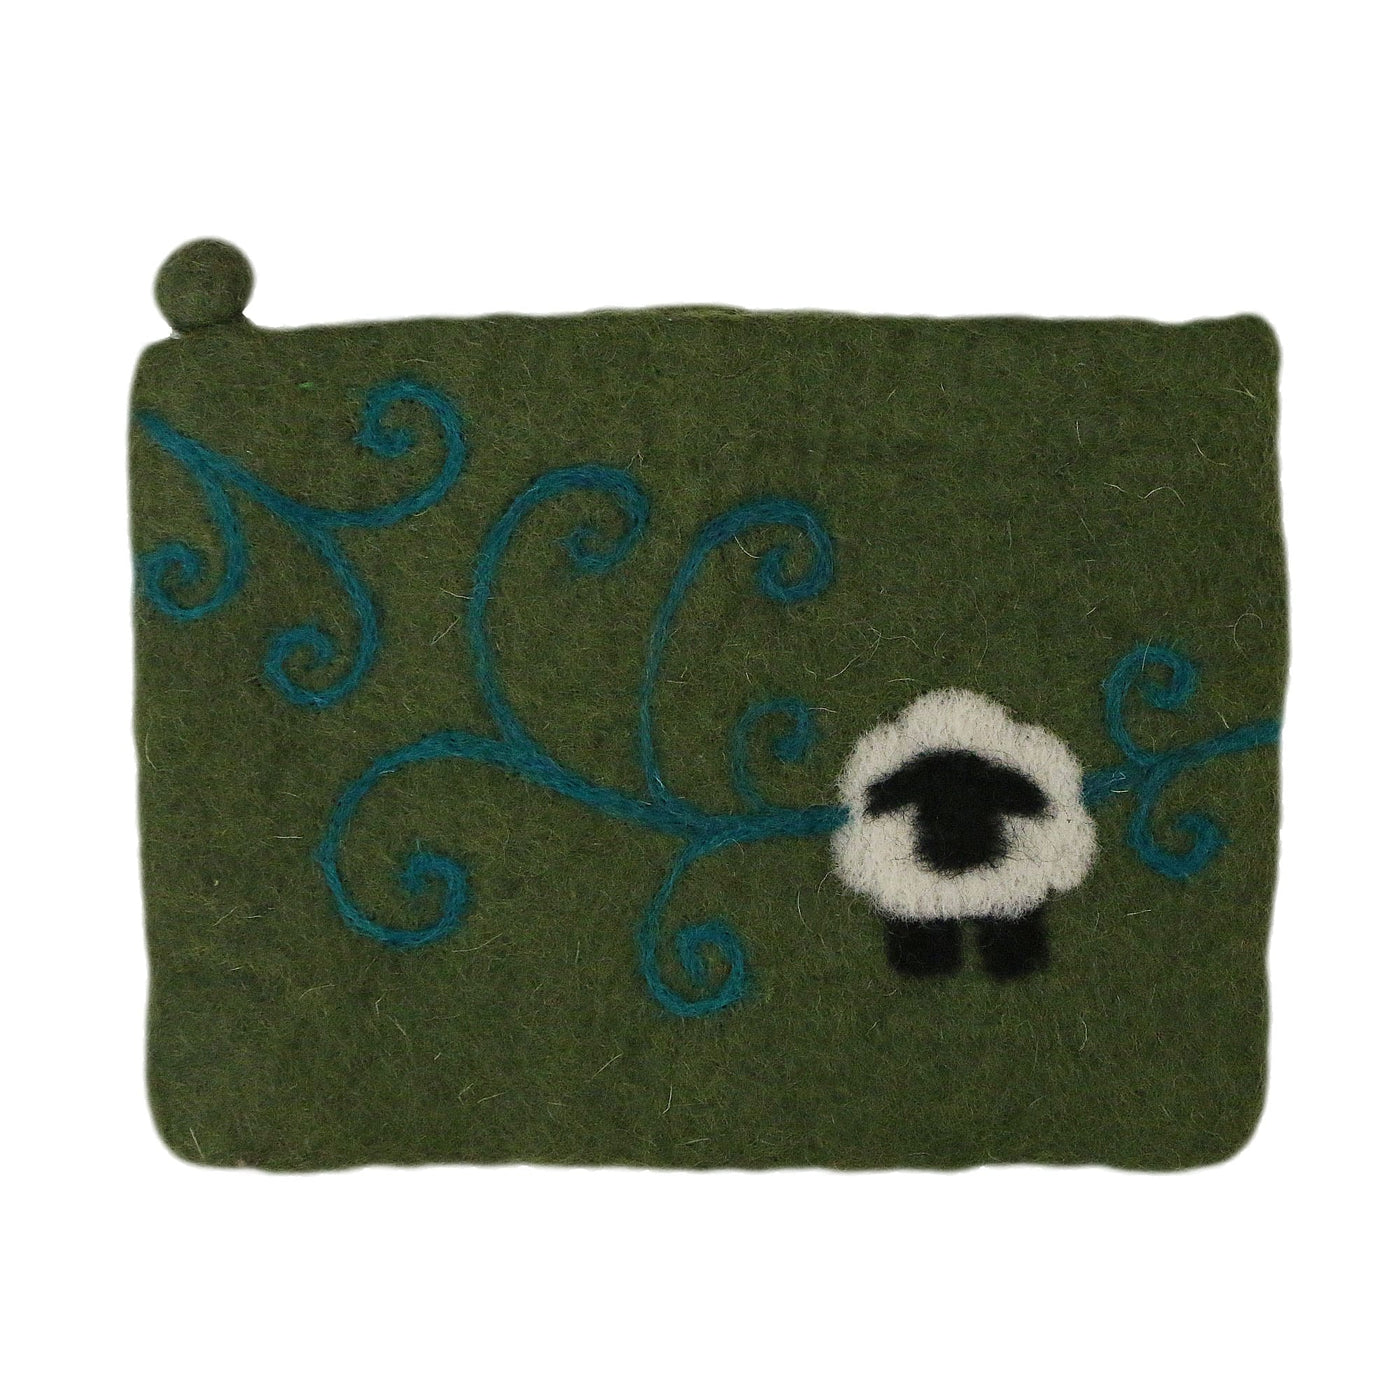 Sheep with Swirls Notions Bag